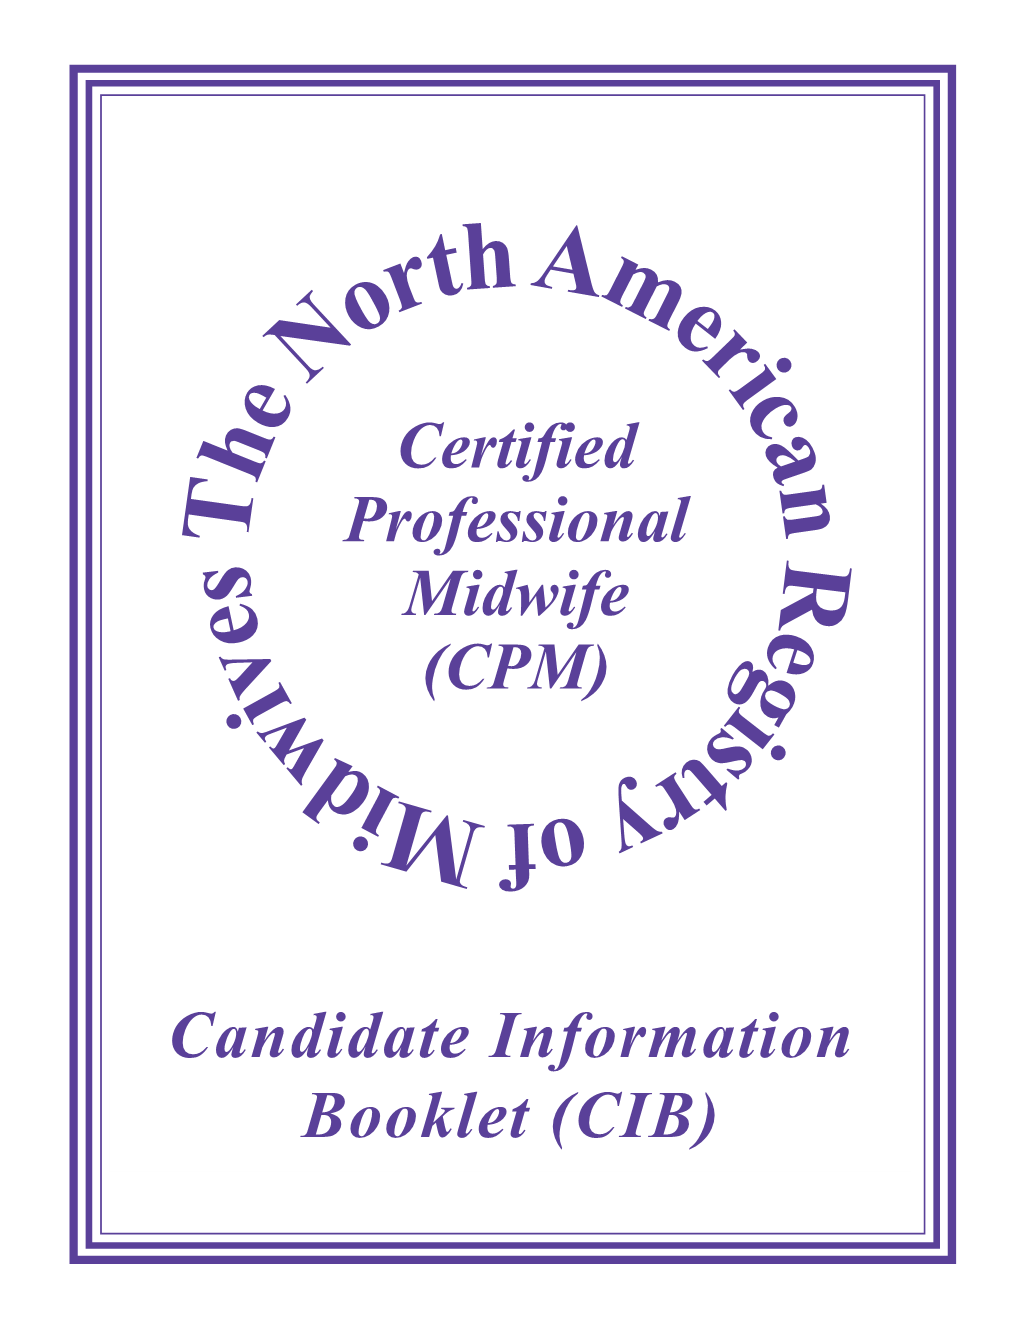 Candidate Information Booklet (CIB)